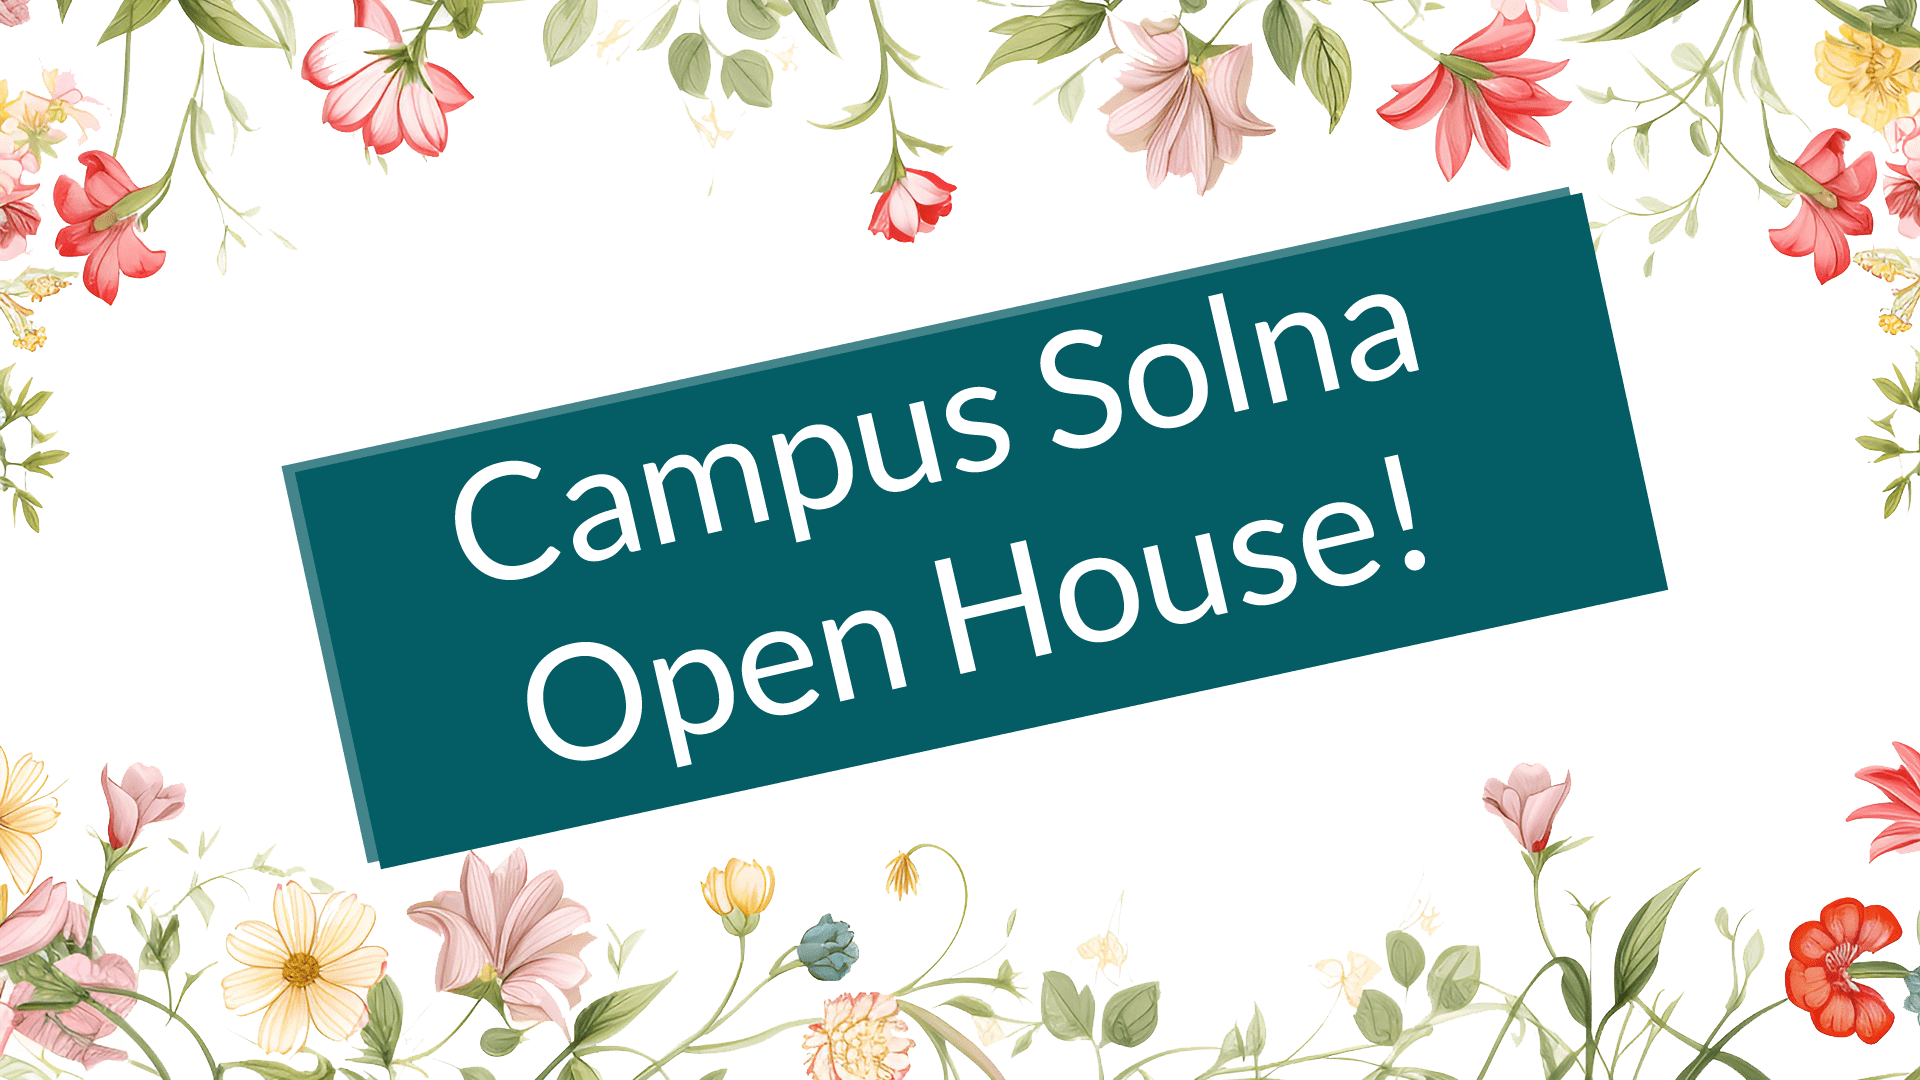 Campus Solna Open House